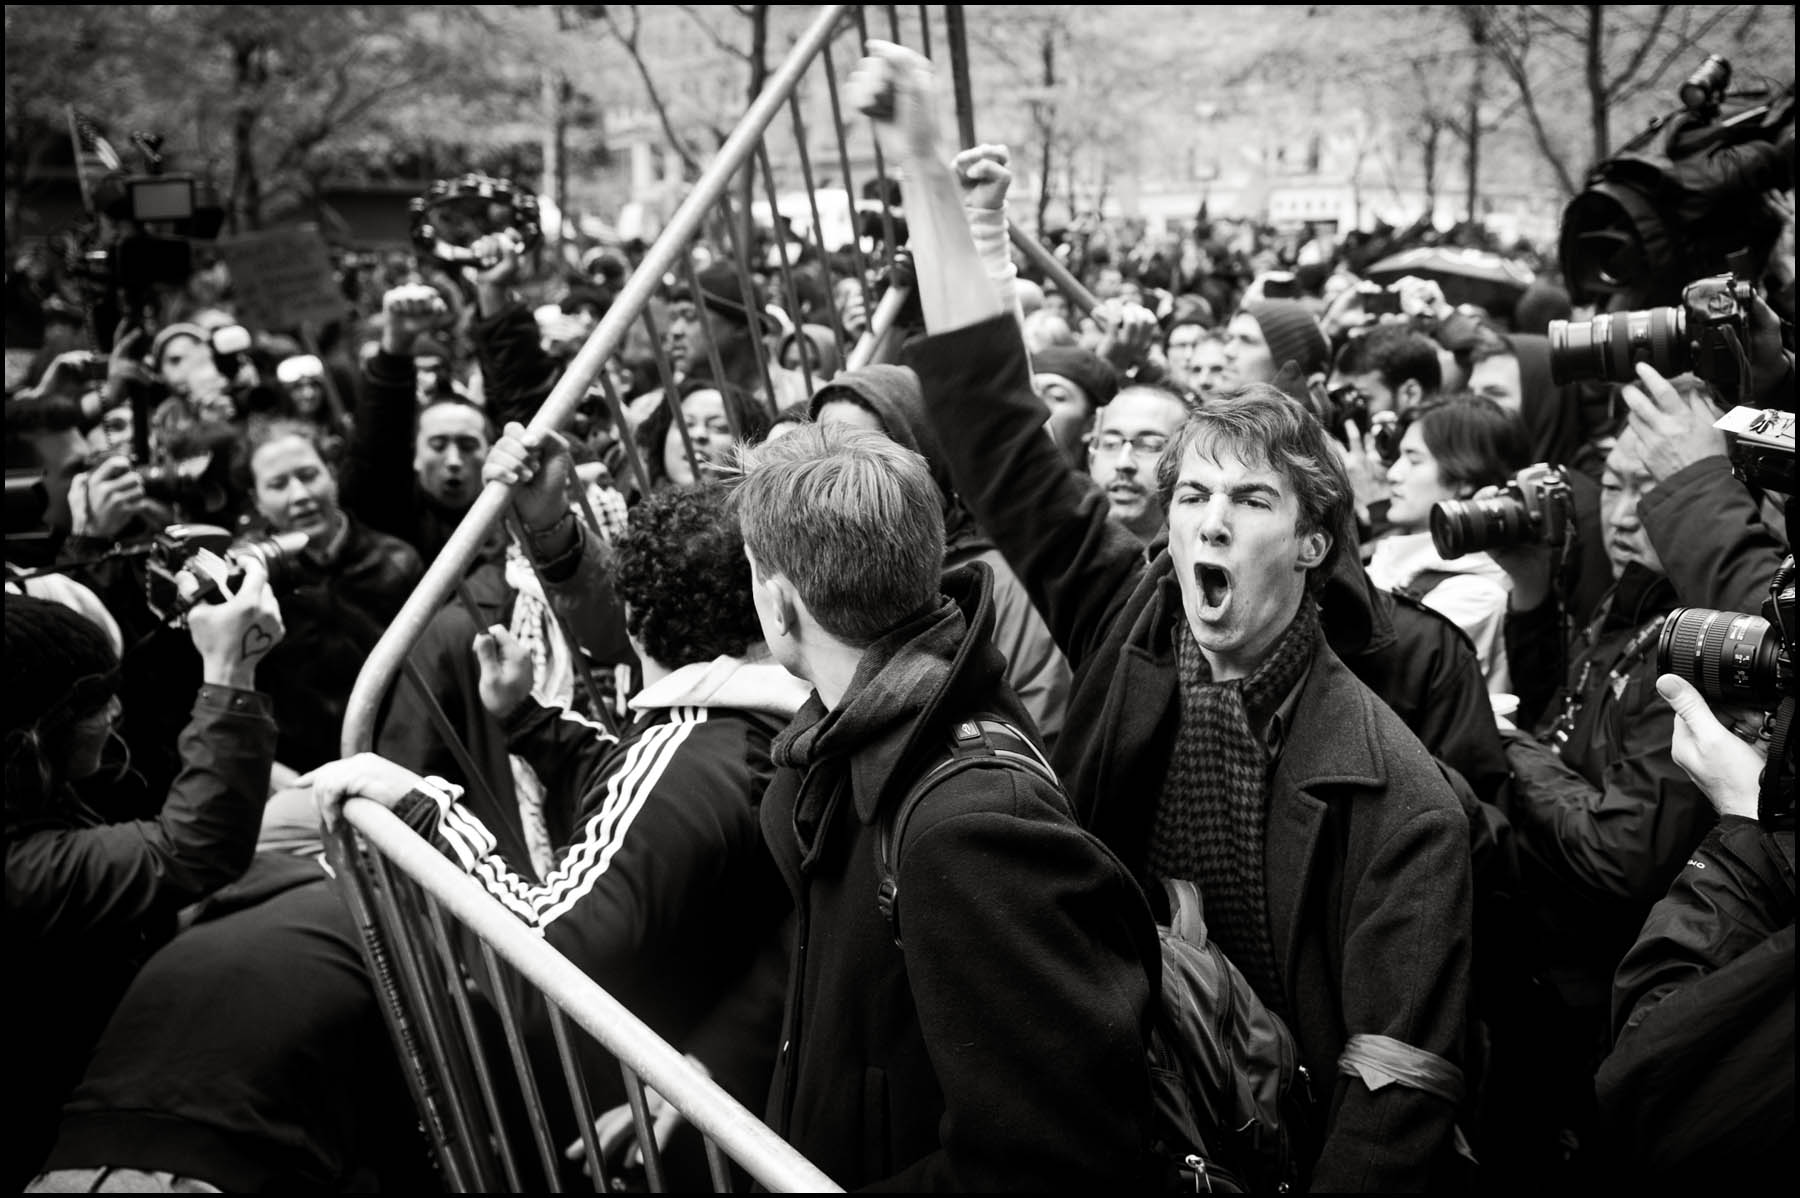 Protesters rip up police barricades in Zuccotti Park during a day of mass action.